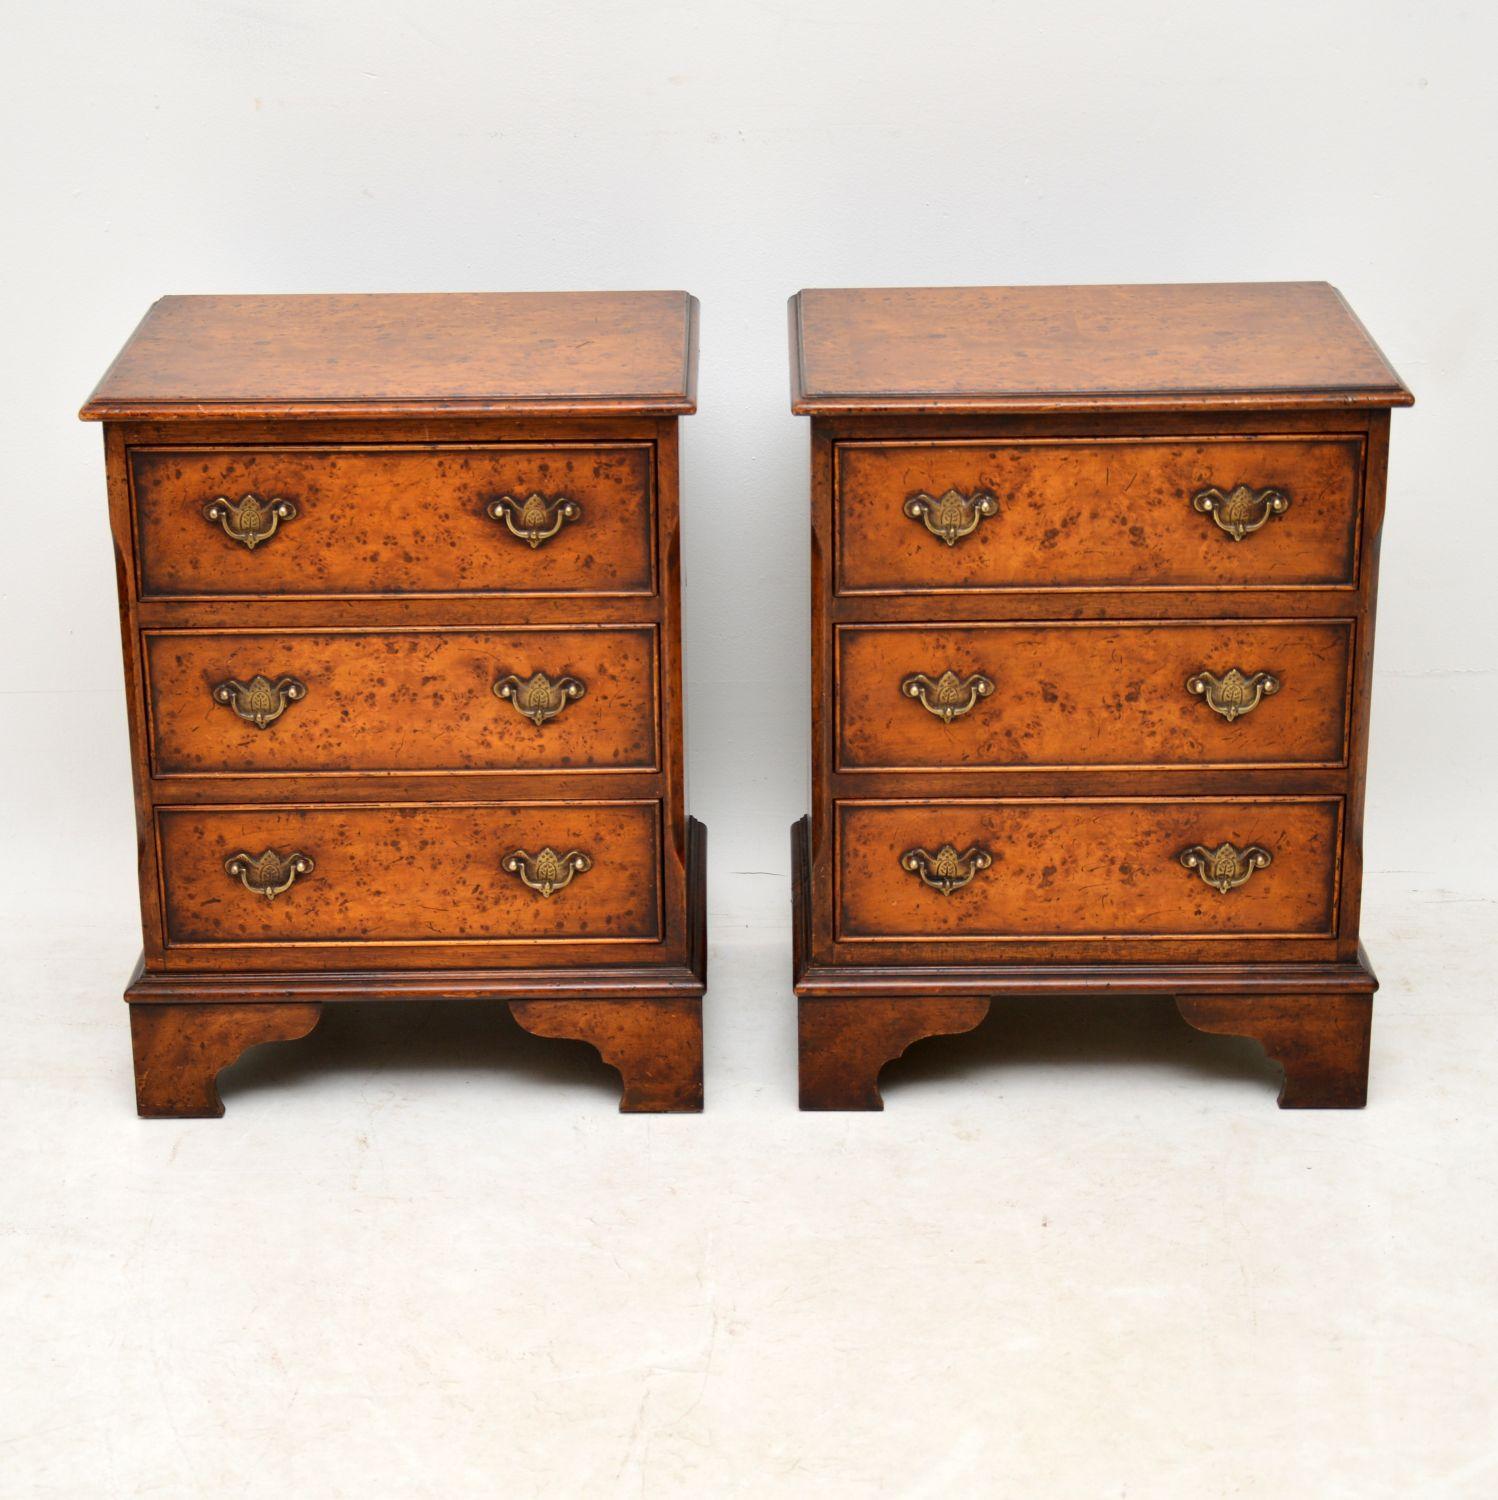 Pair of antique bedside chests in good original condition and with plenty of character. The tops and drawer fronts look like burr walnut and the sides may be pine, even though they have a walnut look. They have a very warm original colour and are